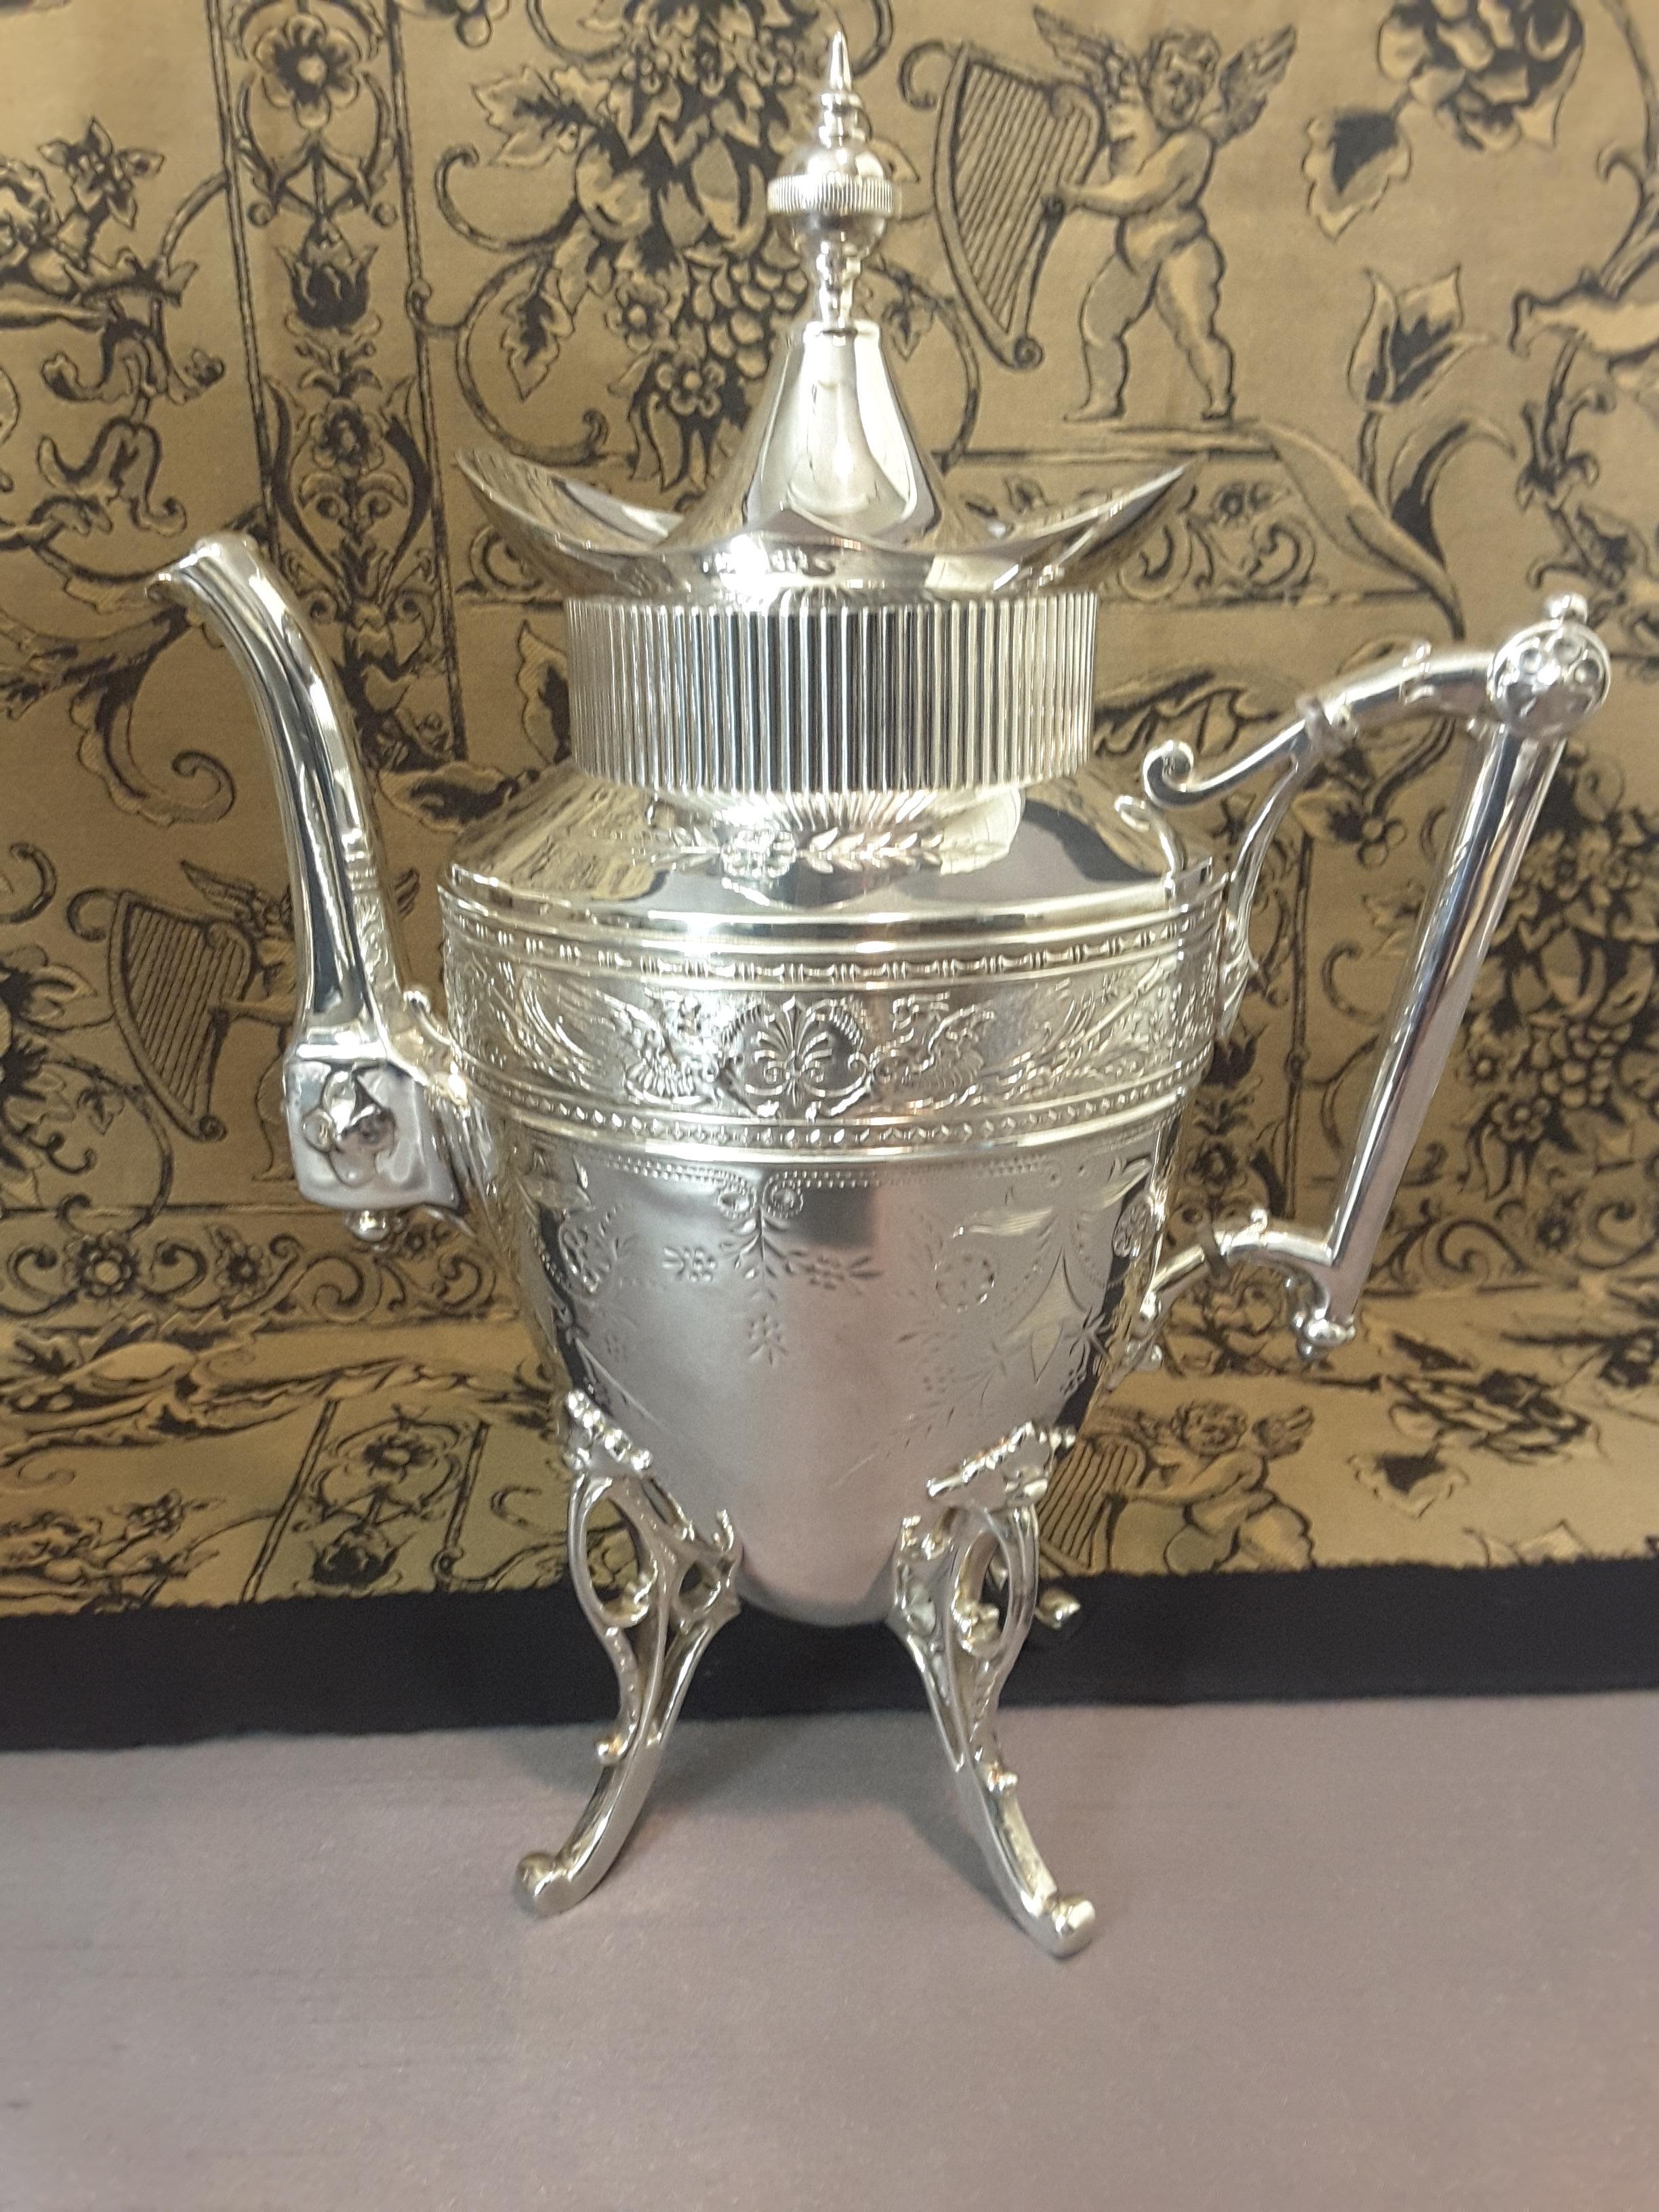 Exquisite Aesthetic Movement Silverplated Tea Service by Simpson, Hall & Miller For Sale 2